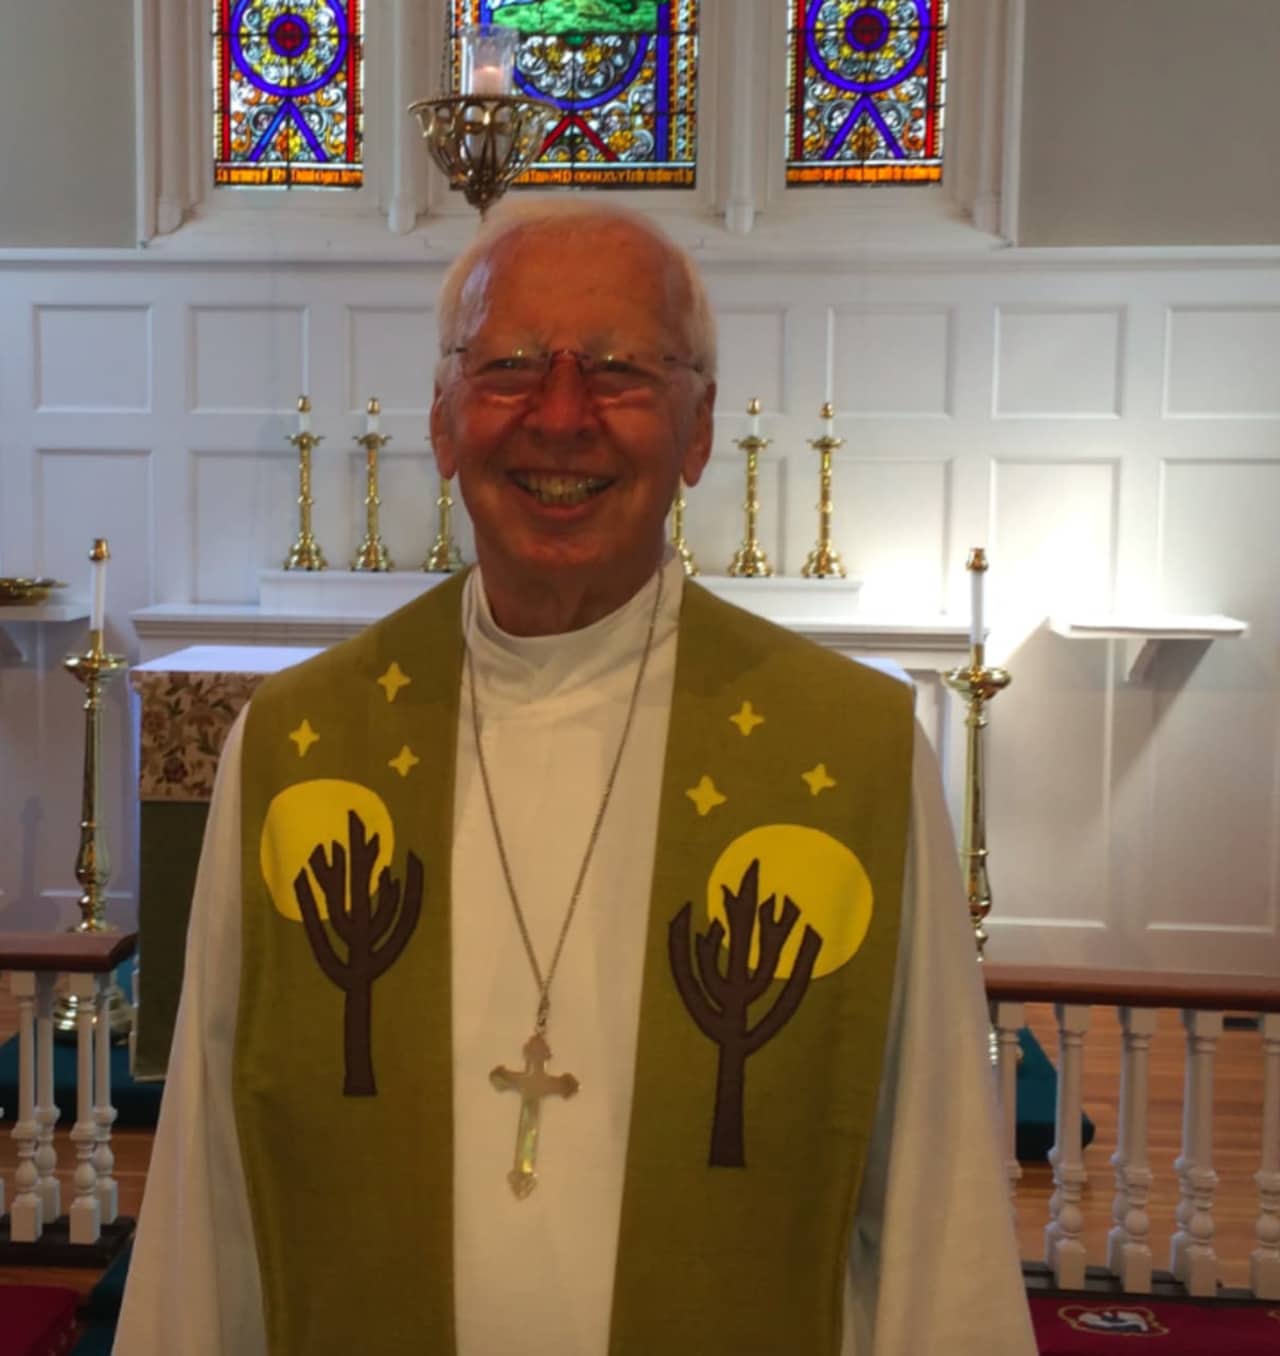 The Rev. Leroy Ness is the new Full-time Interim Pastor at St. Michael's Lutheran